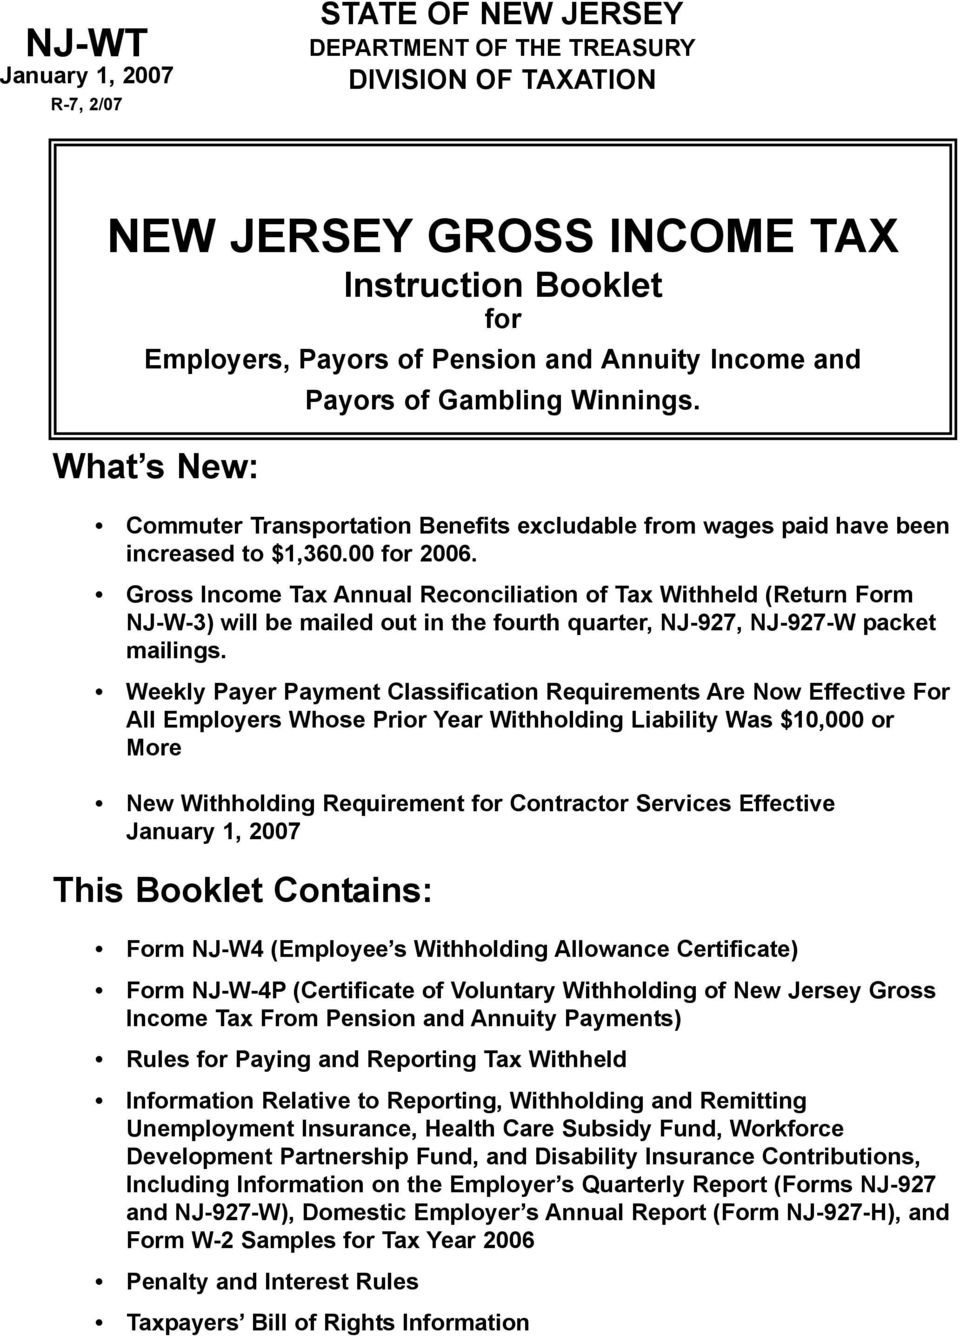 New Jersey Gross Income Tax Instruction Booklet For Employers Payors Of Pension And Annuity Income And Pdf Free Download